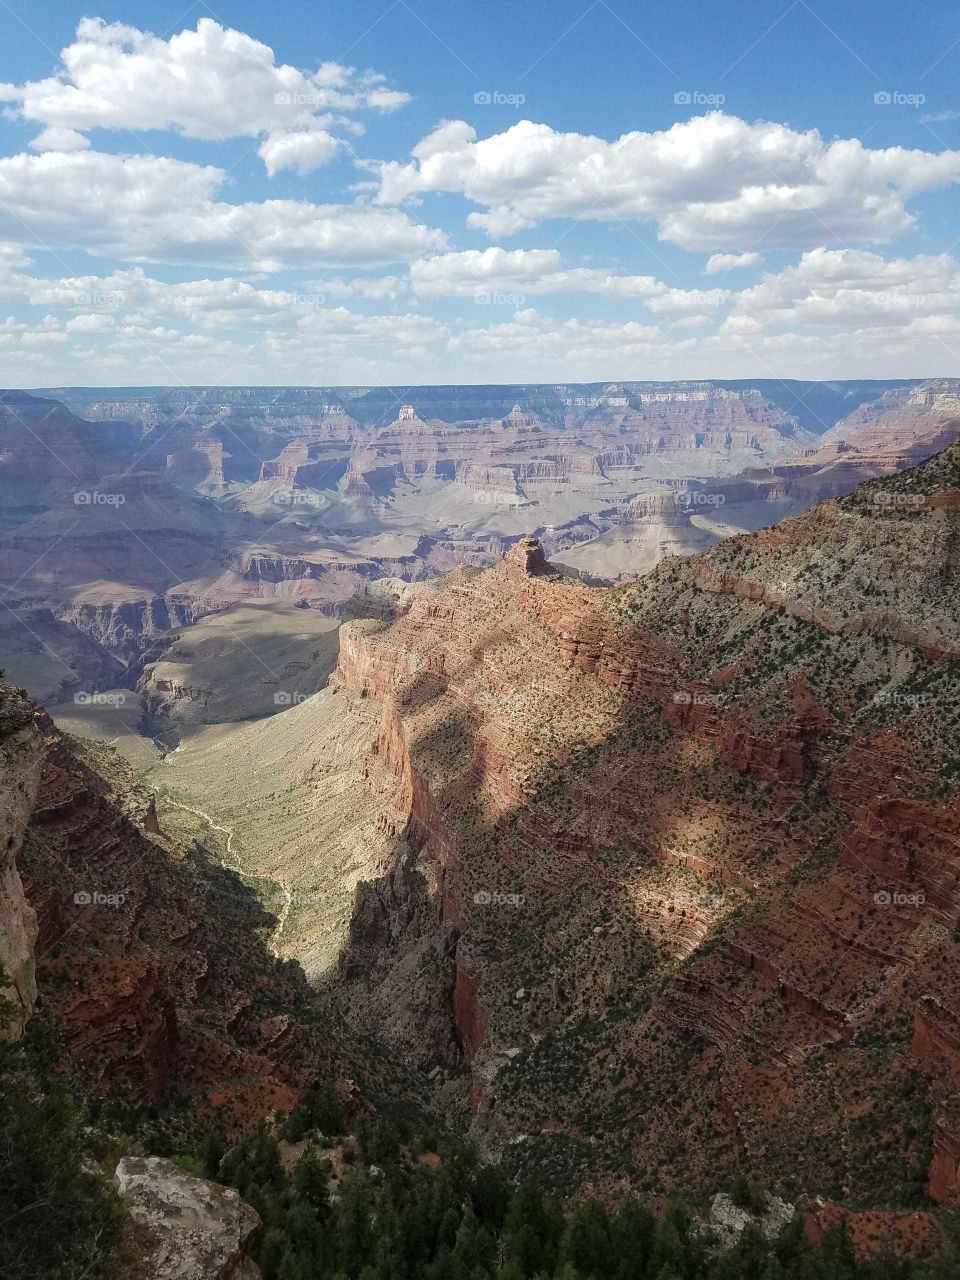 a beautiful and incredible day at the Grand canyon. traveling across the U.S.